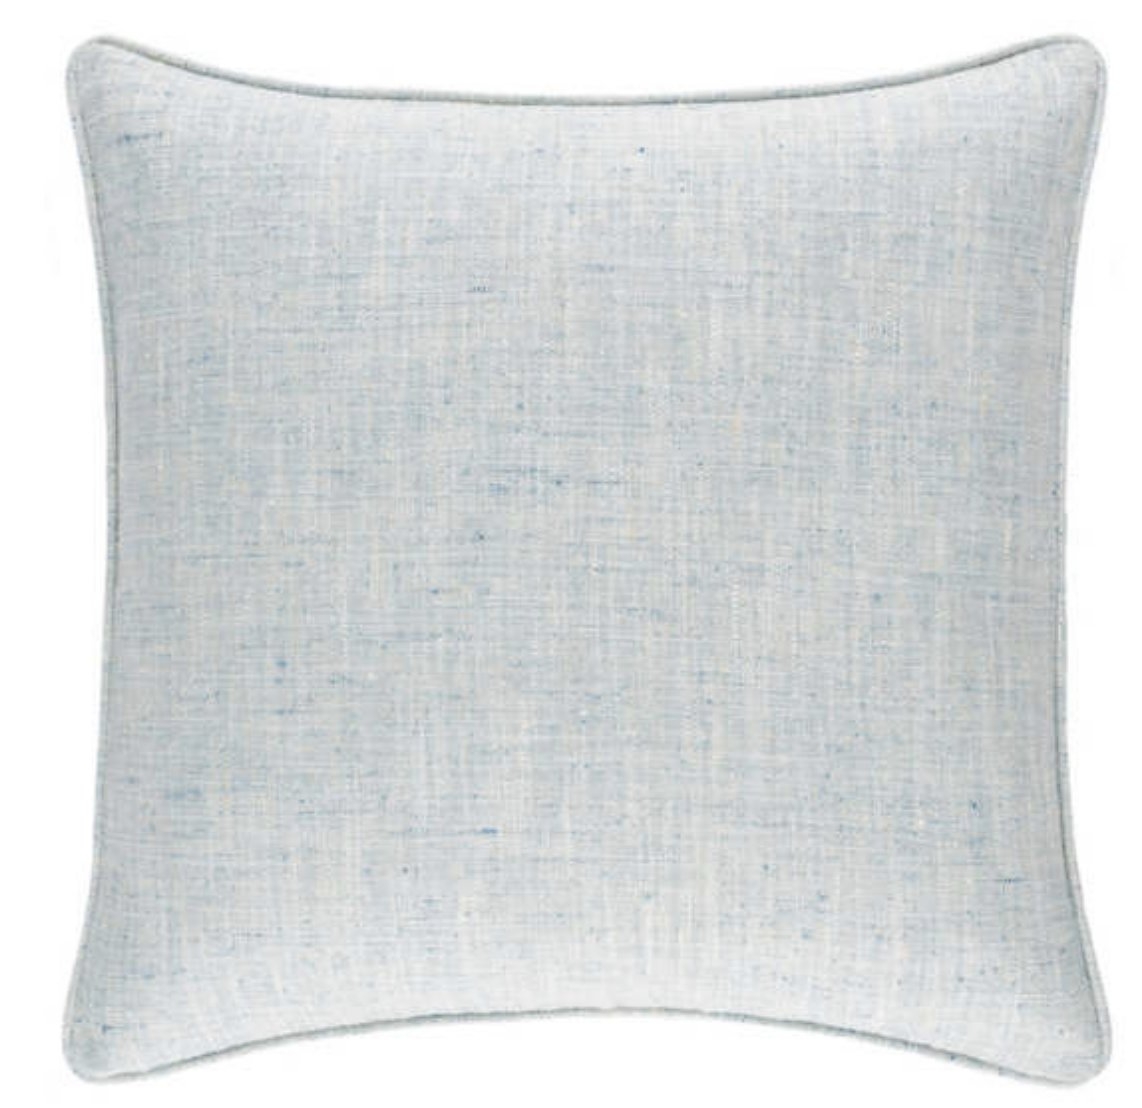 GREYLOCK SOFT BLUE INDOOR/OUTDOOR DECORATIVE PILLOW - 22" x 22" - Insert included - Image 0